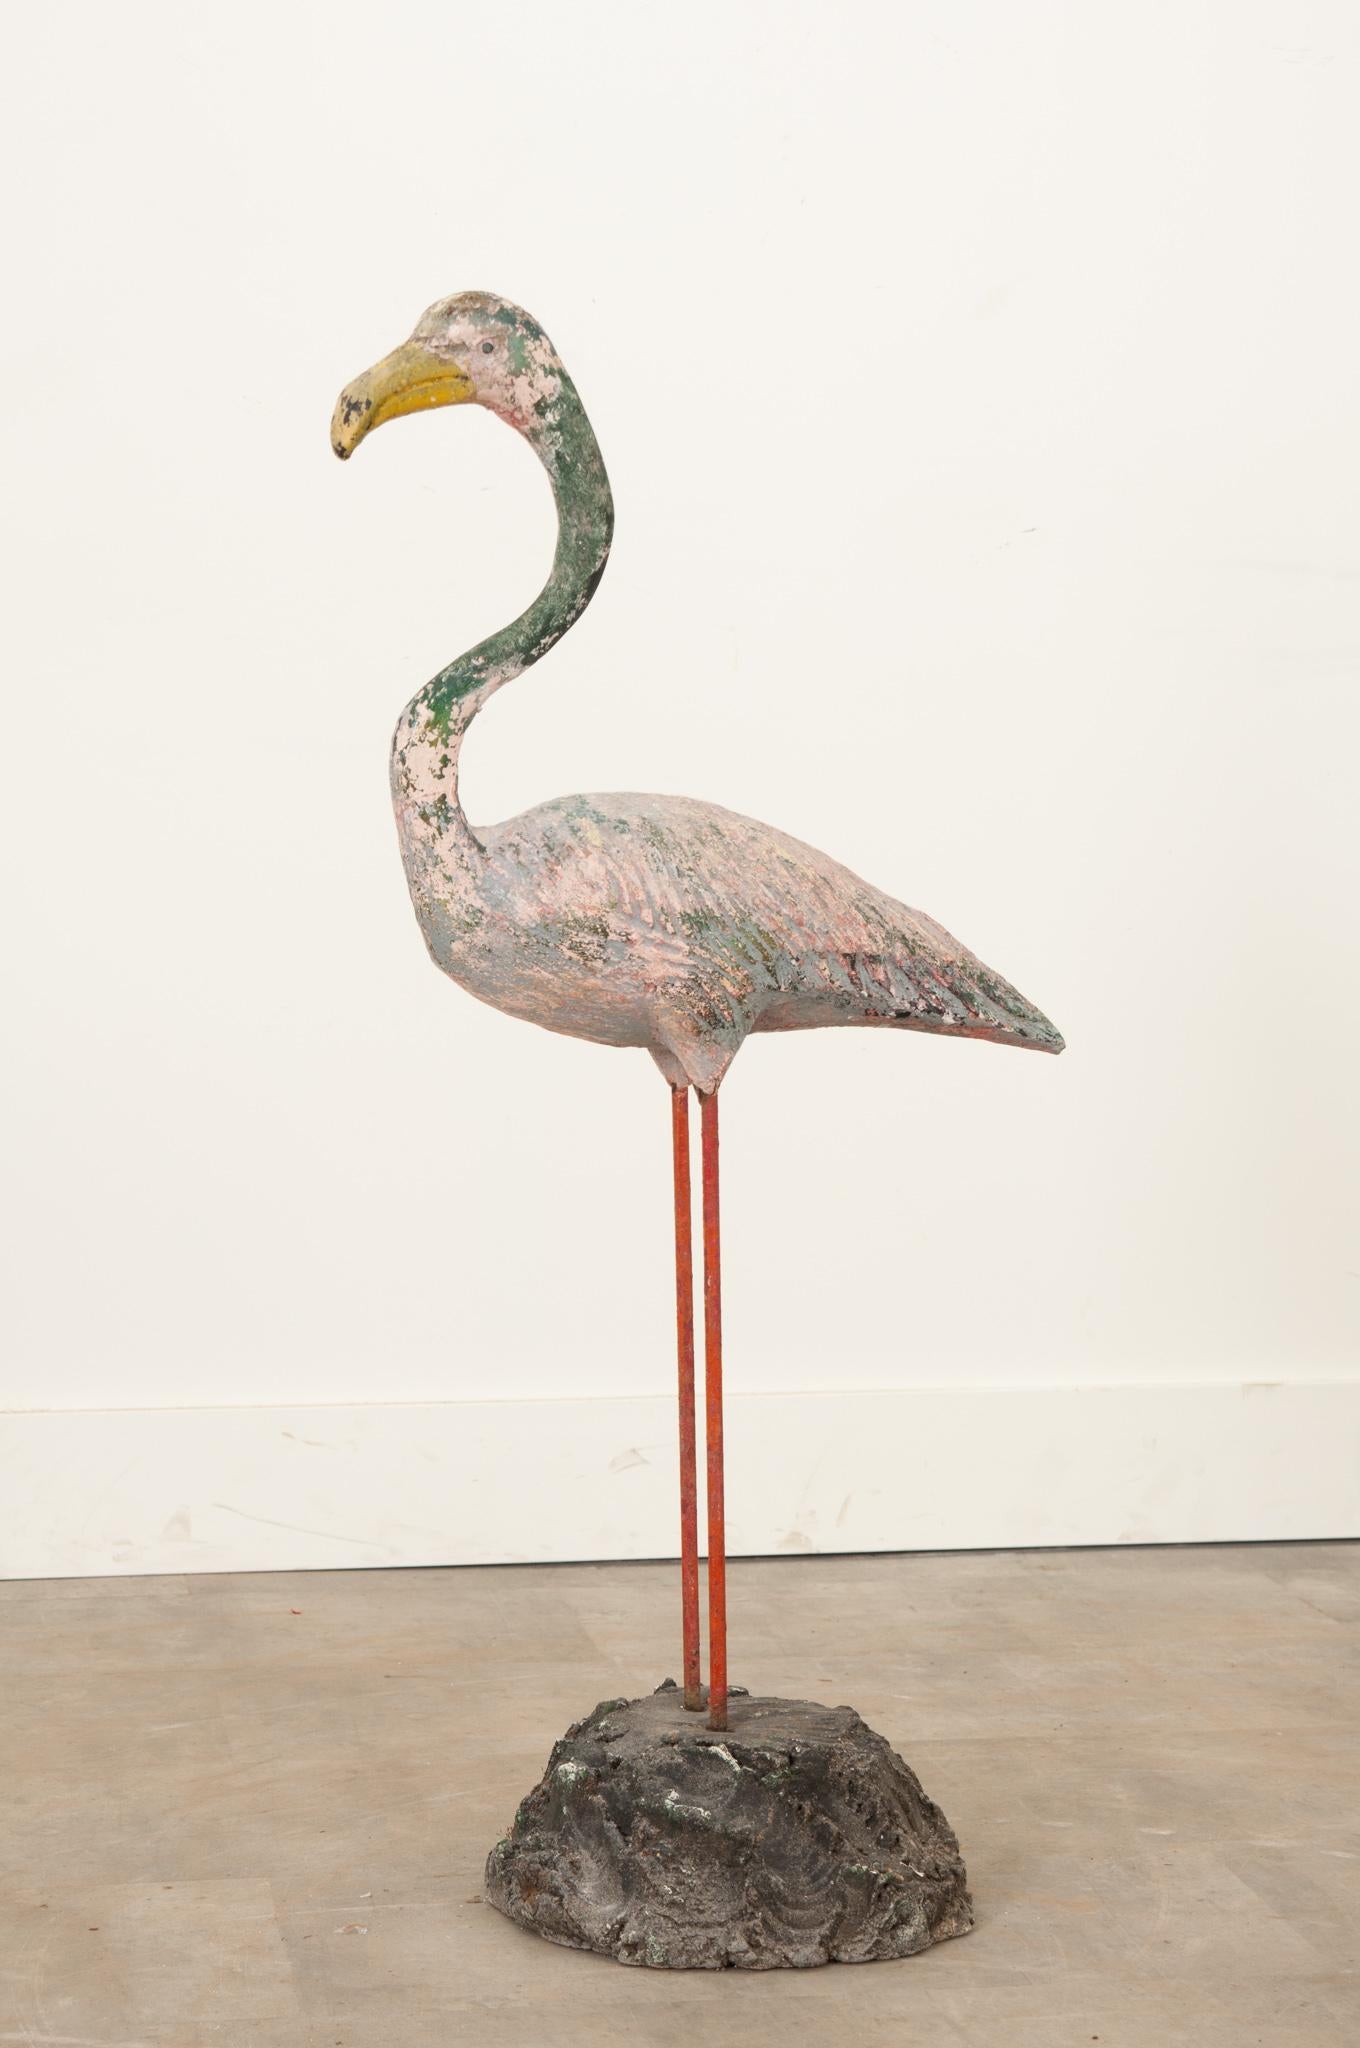 This playful stone and metal flamingo adds whimsy to any garden or interior. A perfect way to add color and fun to your designs is to add English garden statues such as this one. Its worn paint suits this flamingo well. Be sure to view the detailed